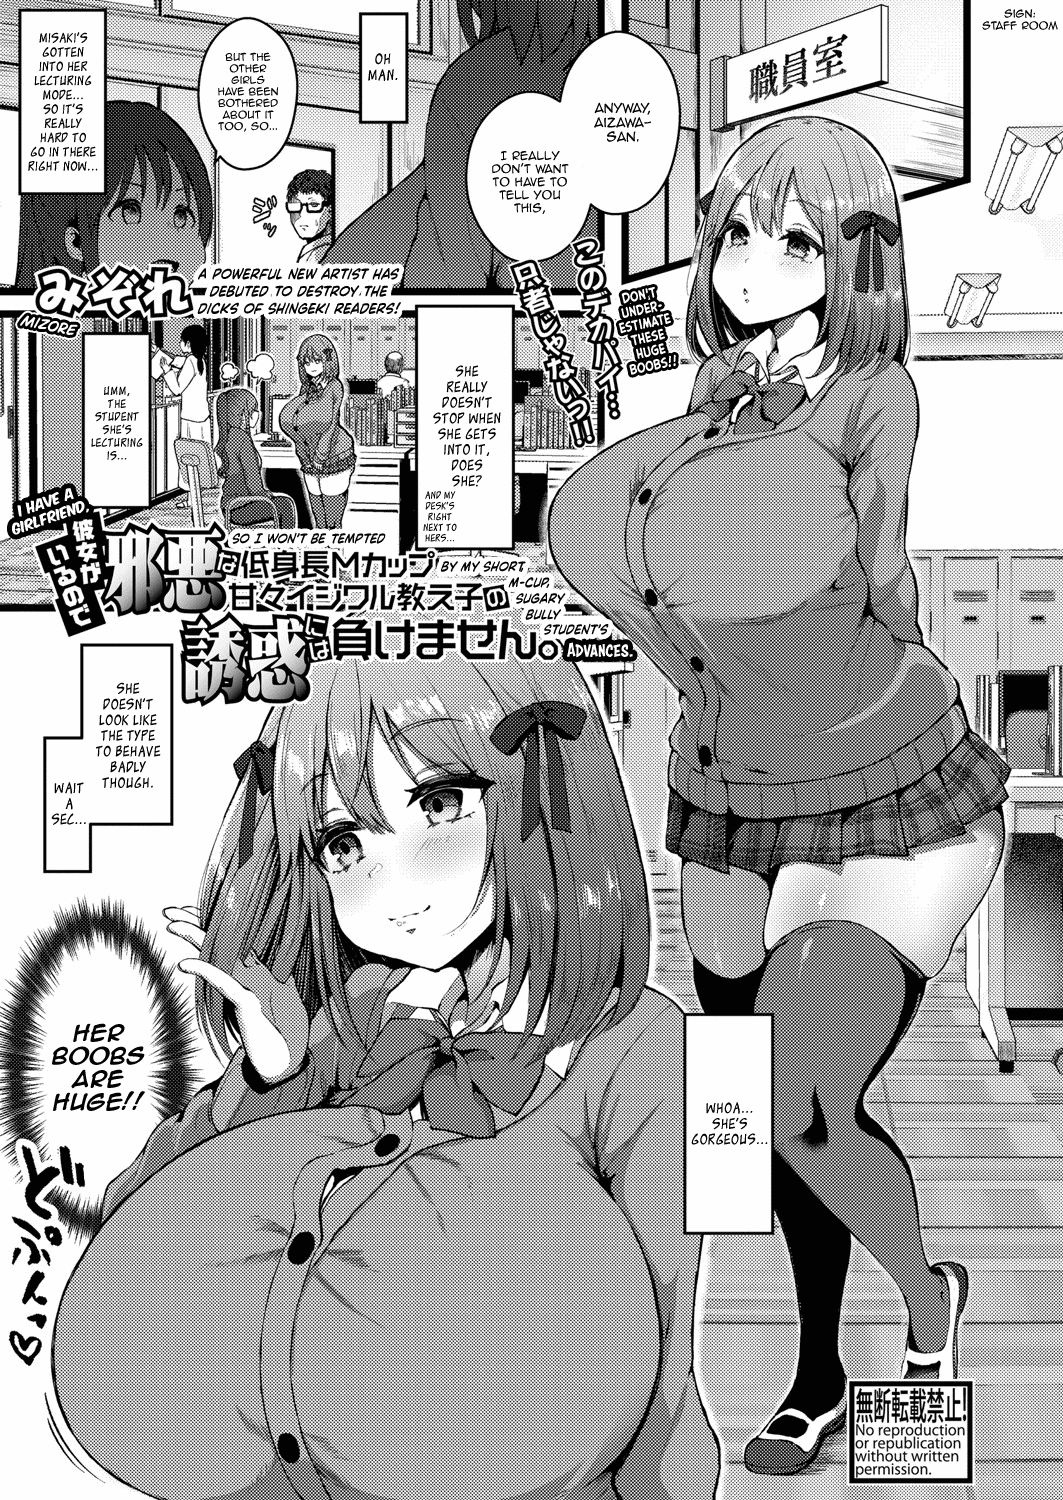 I Have A Girlfriend, So I Wont Be Tempted by My Short, M-cup, Sugary Bully Students Advances Mizore Porn Comic